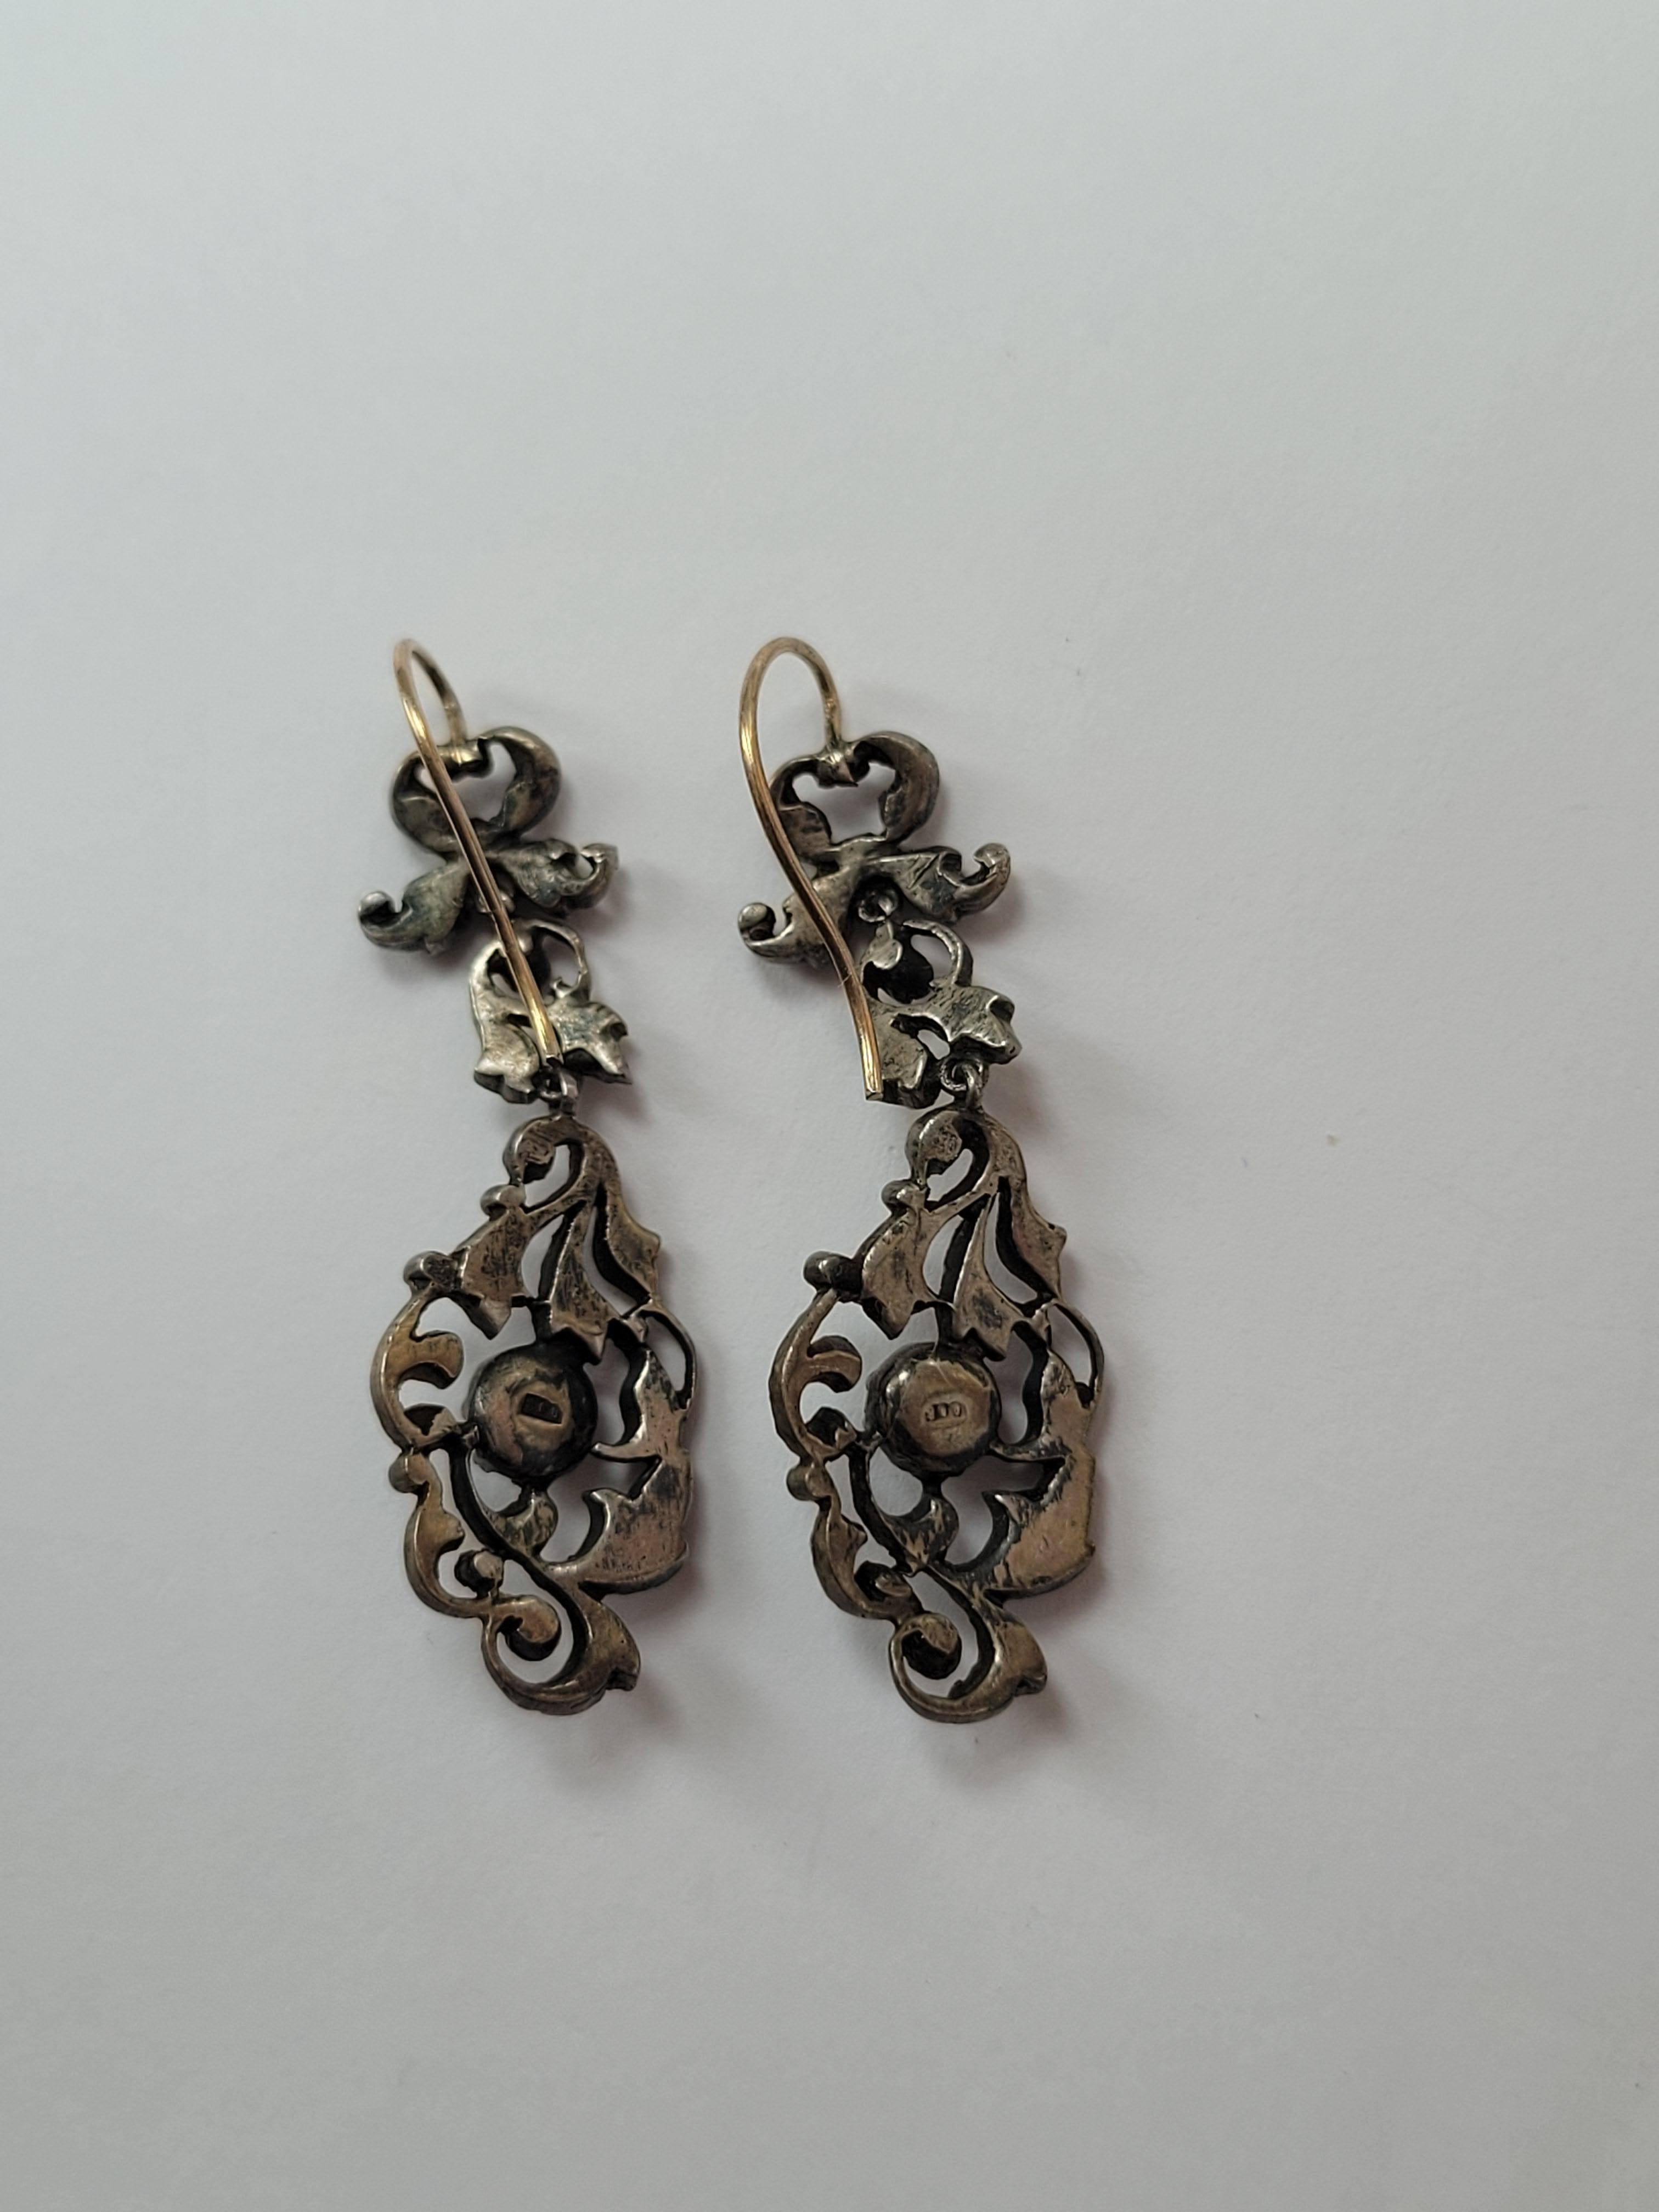 Spectacular Antique Edwardian Gold Silver Paste Drop Earrings For Sale 1